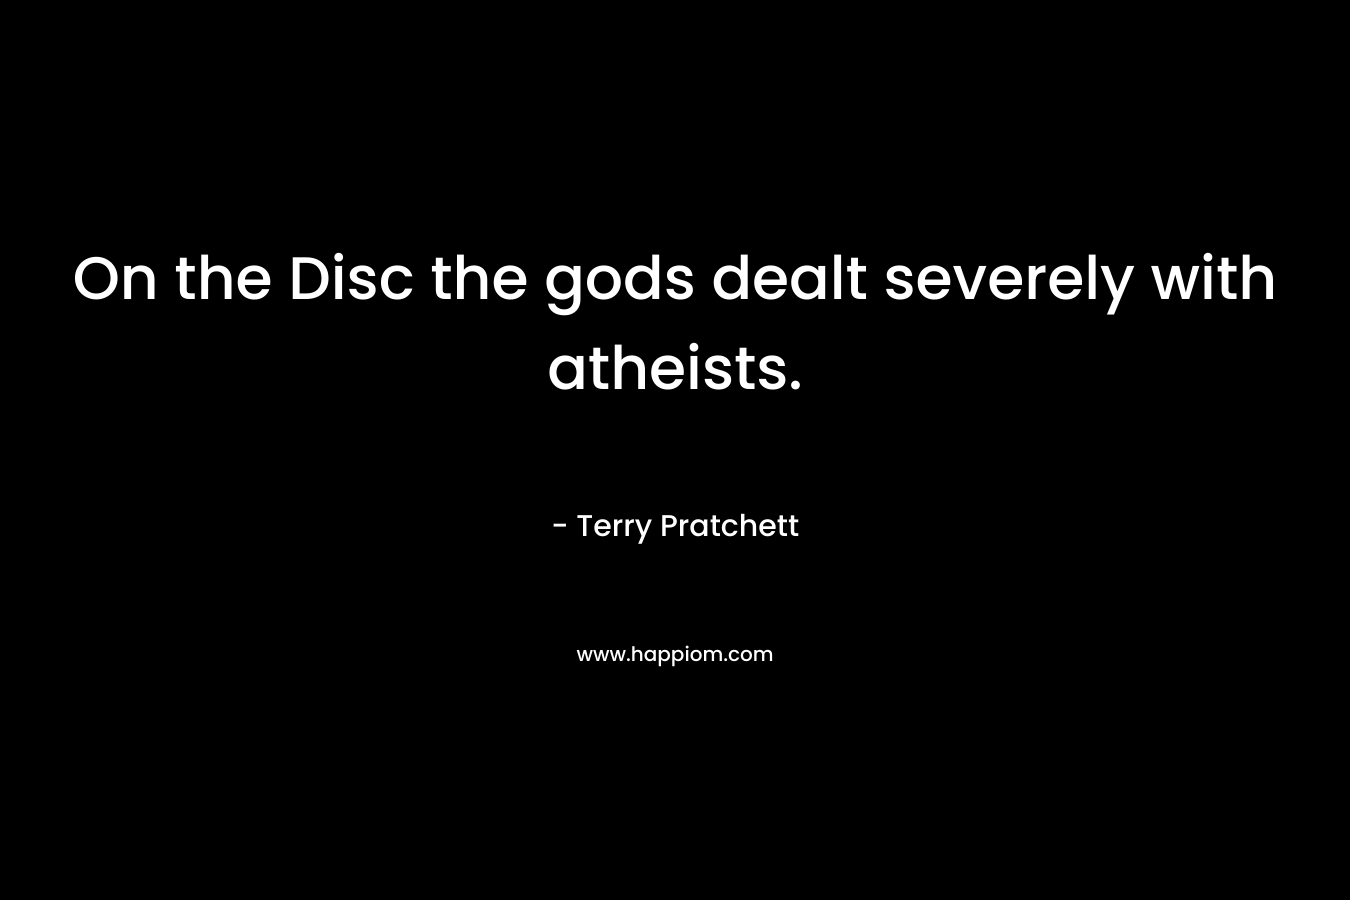 On the Disc the gods dealt severely with atheists.